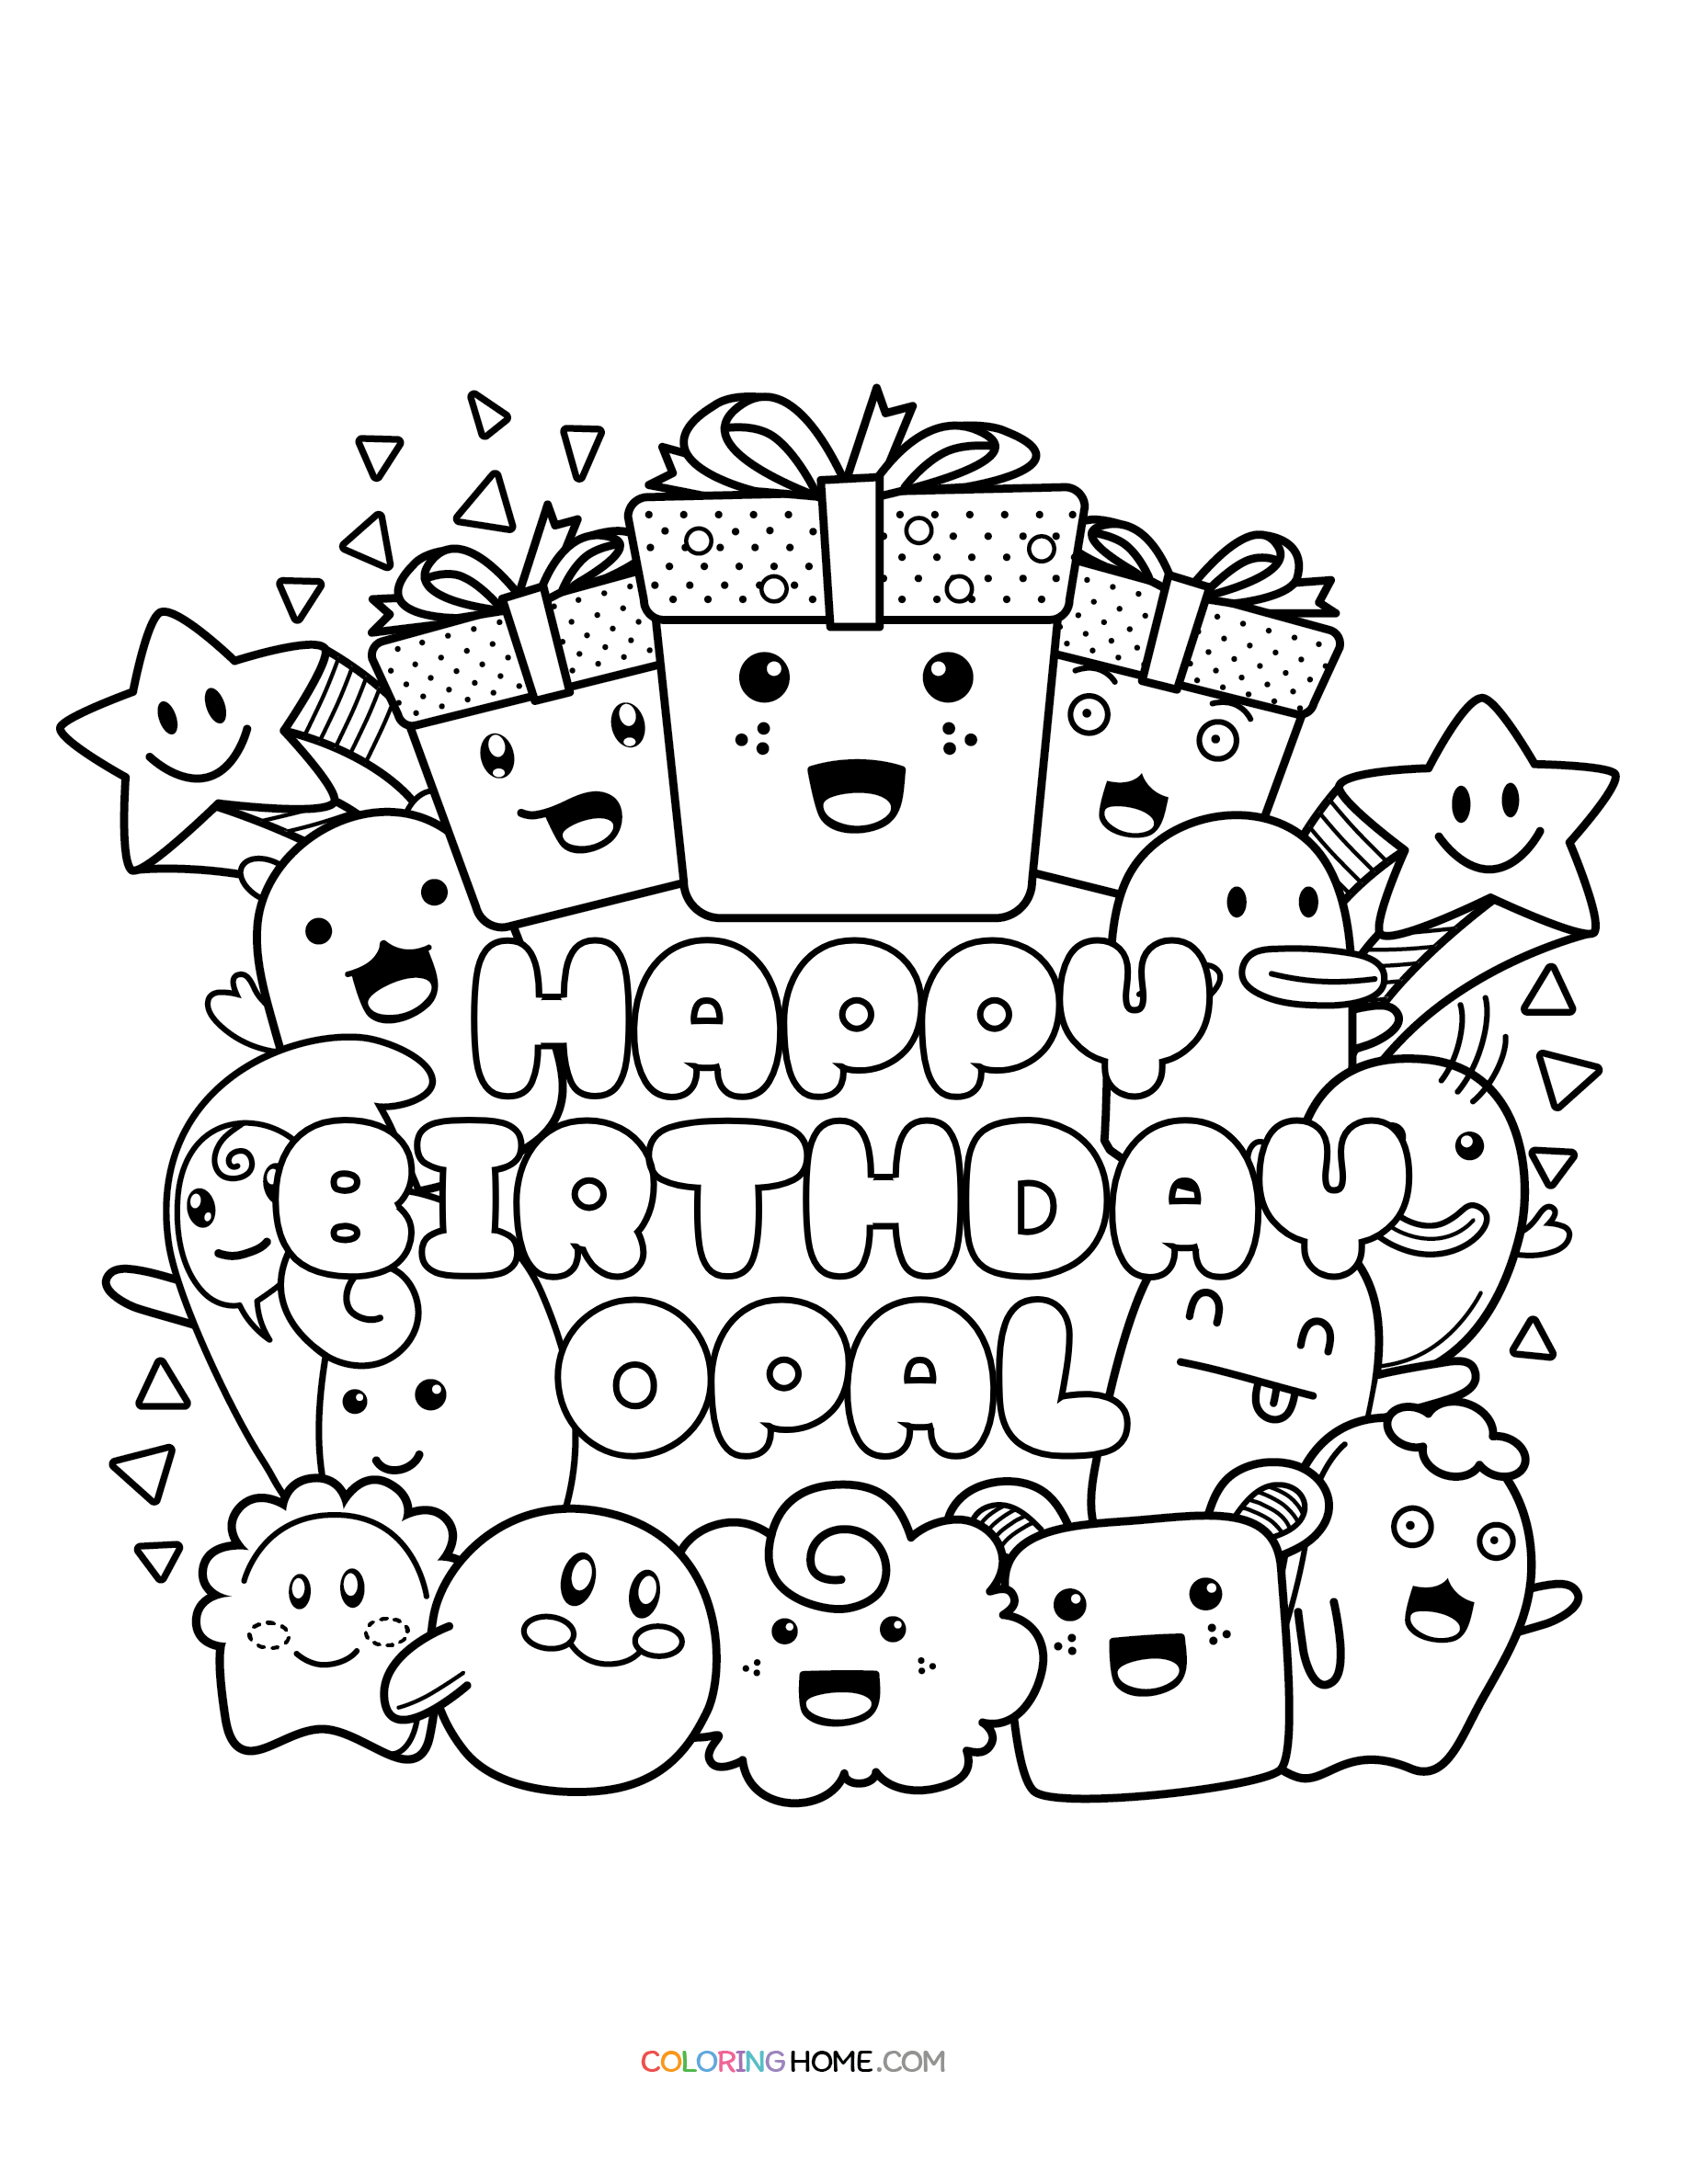 Happy Birthday Opal coloring page